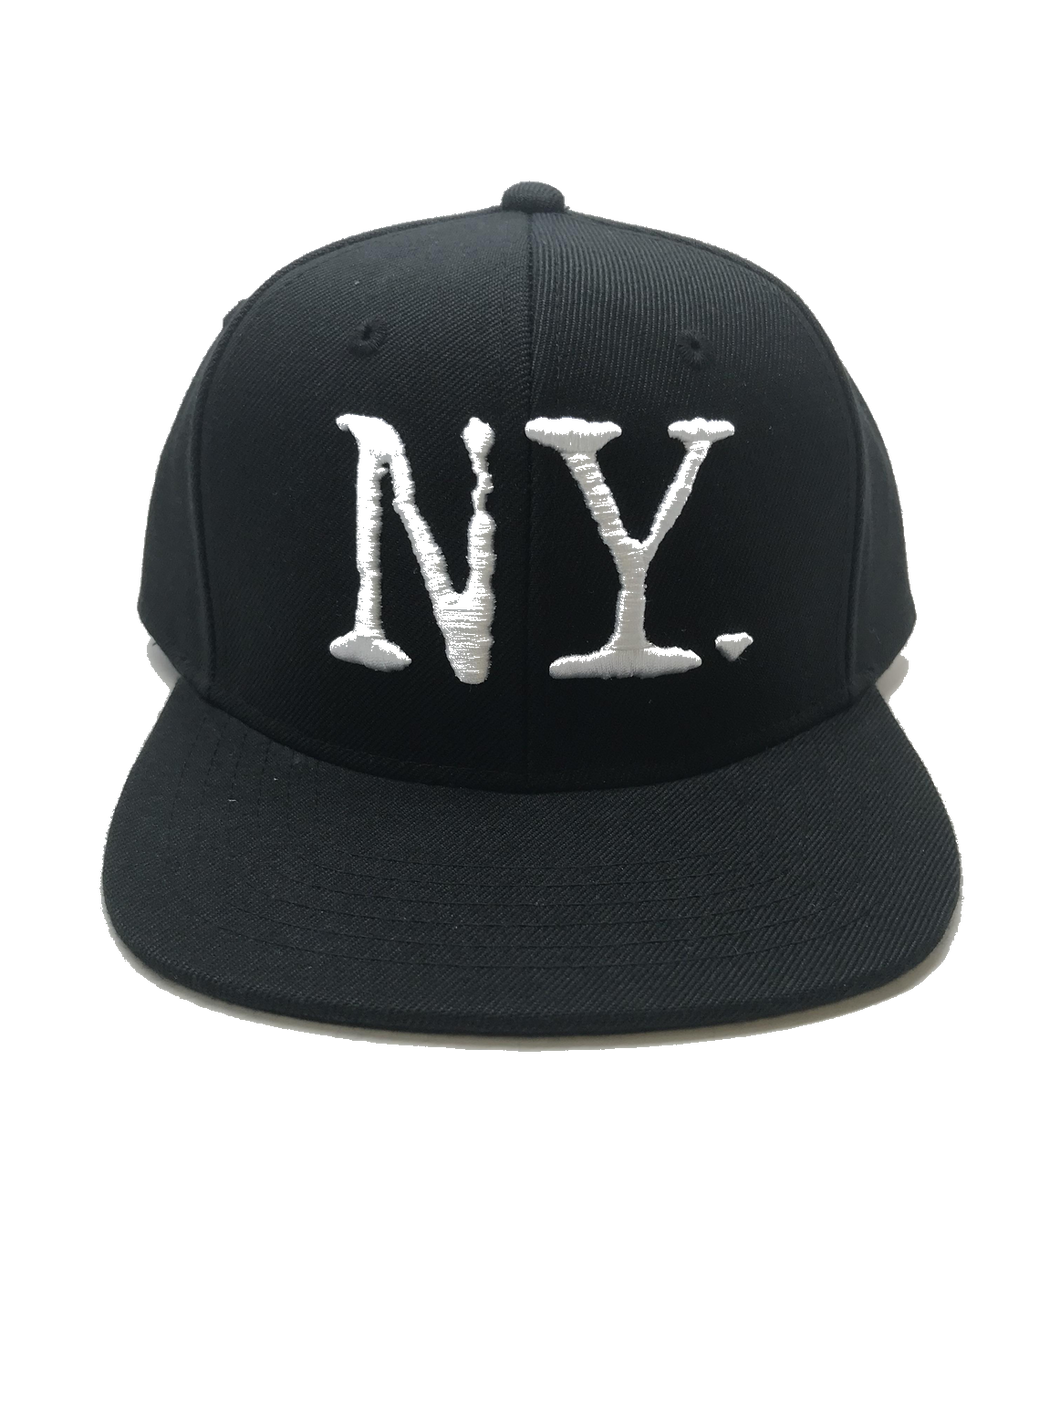 MR. NY SNAPBACK (More colors available)